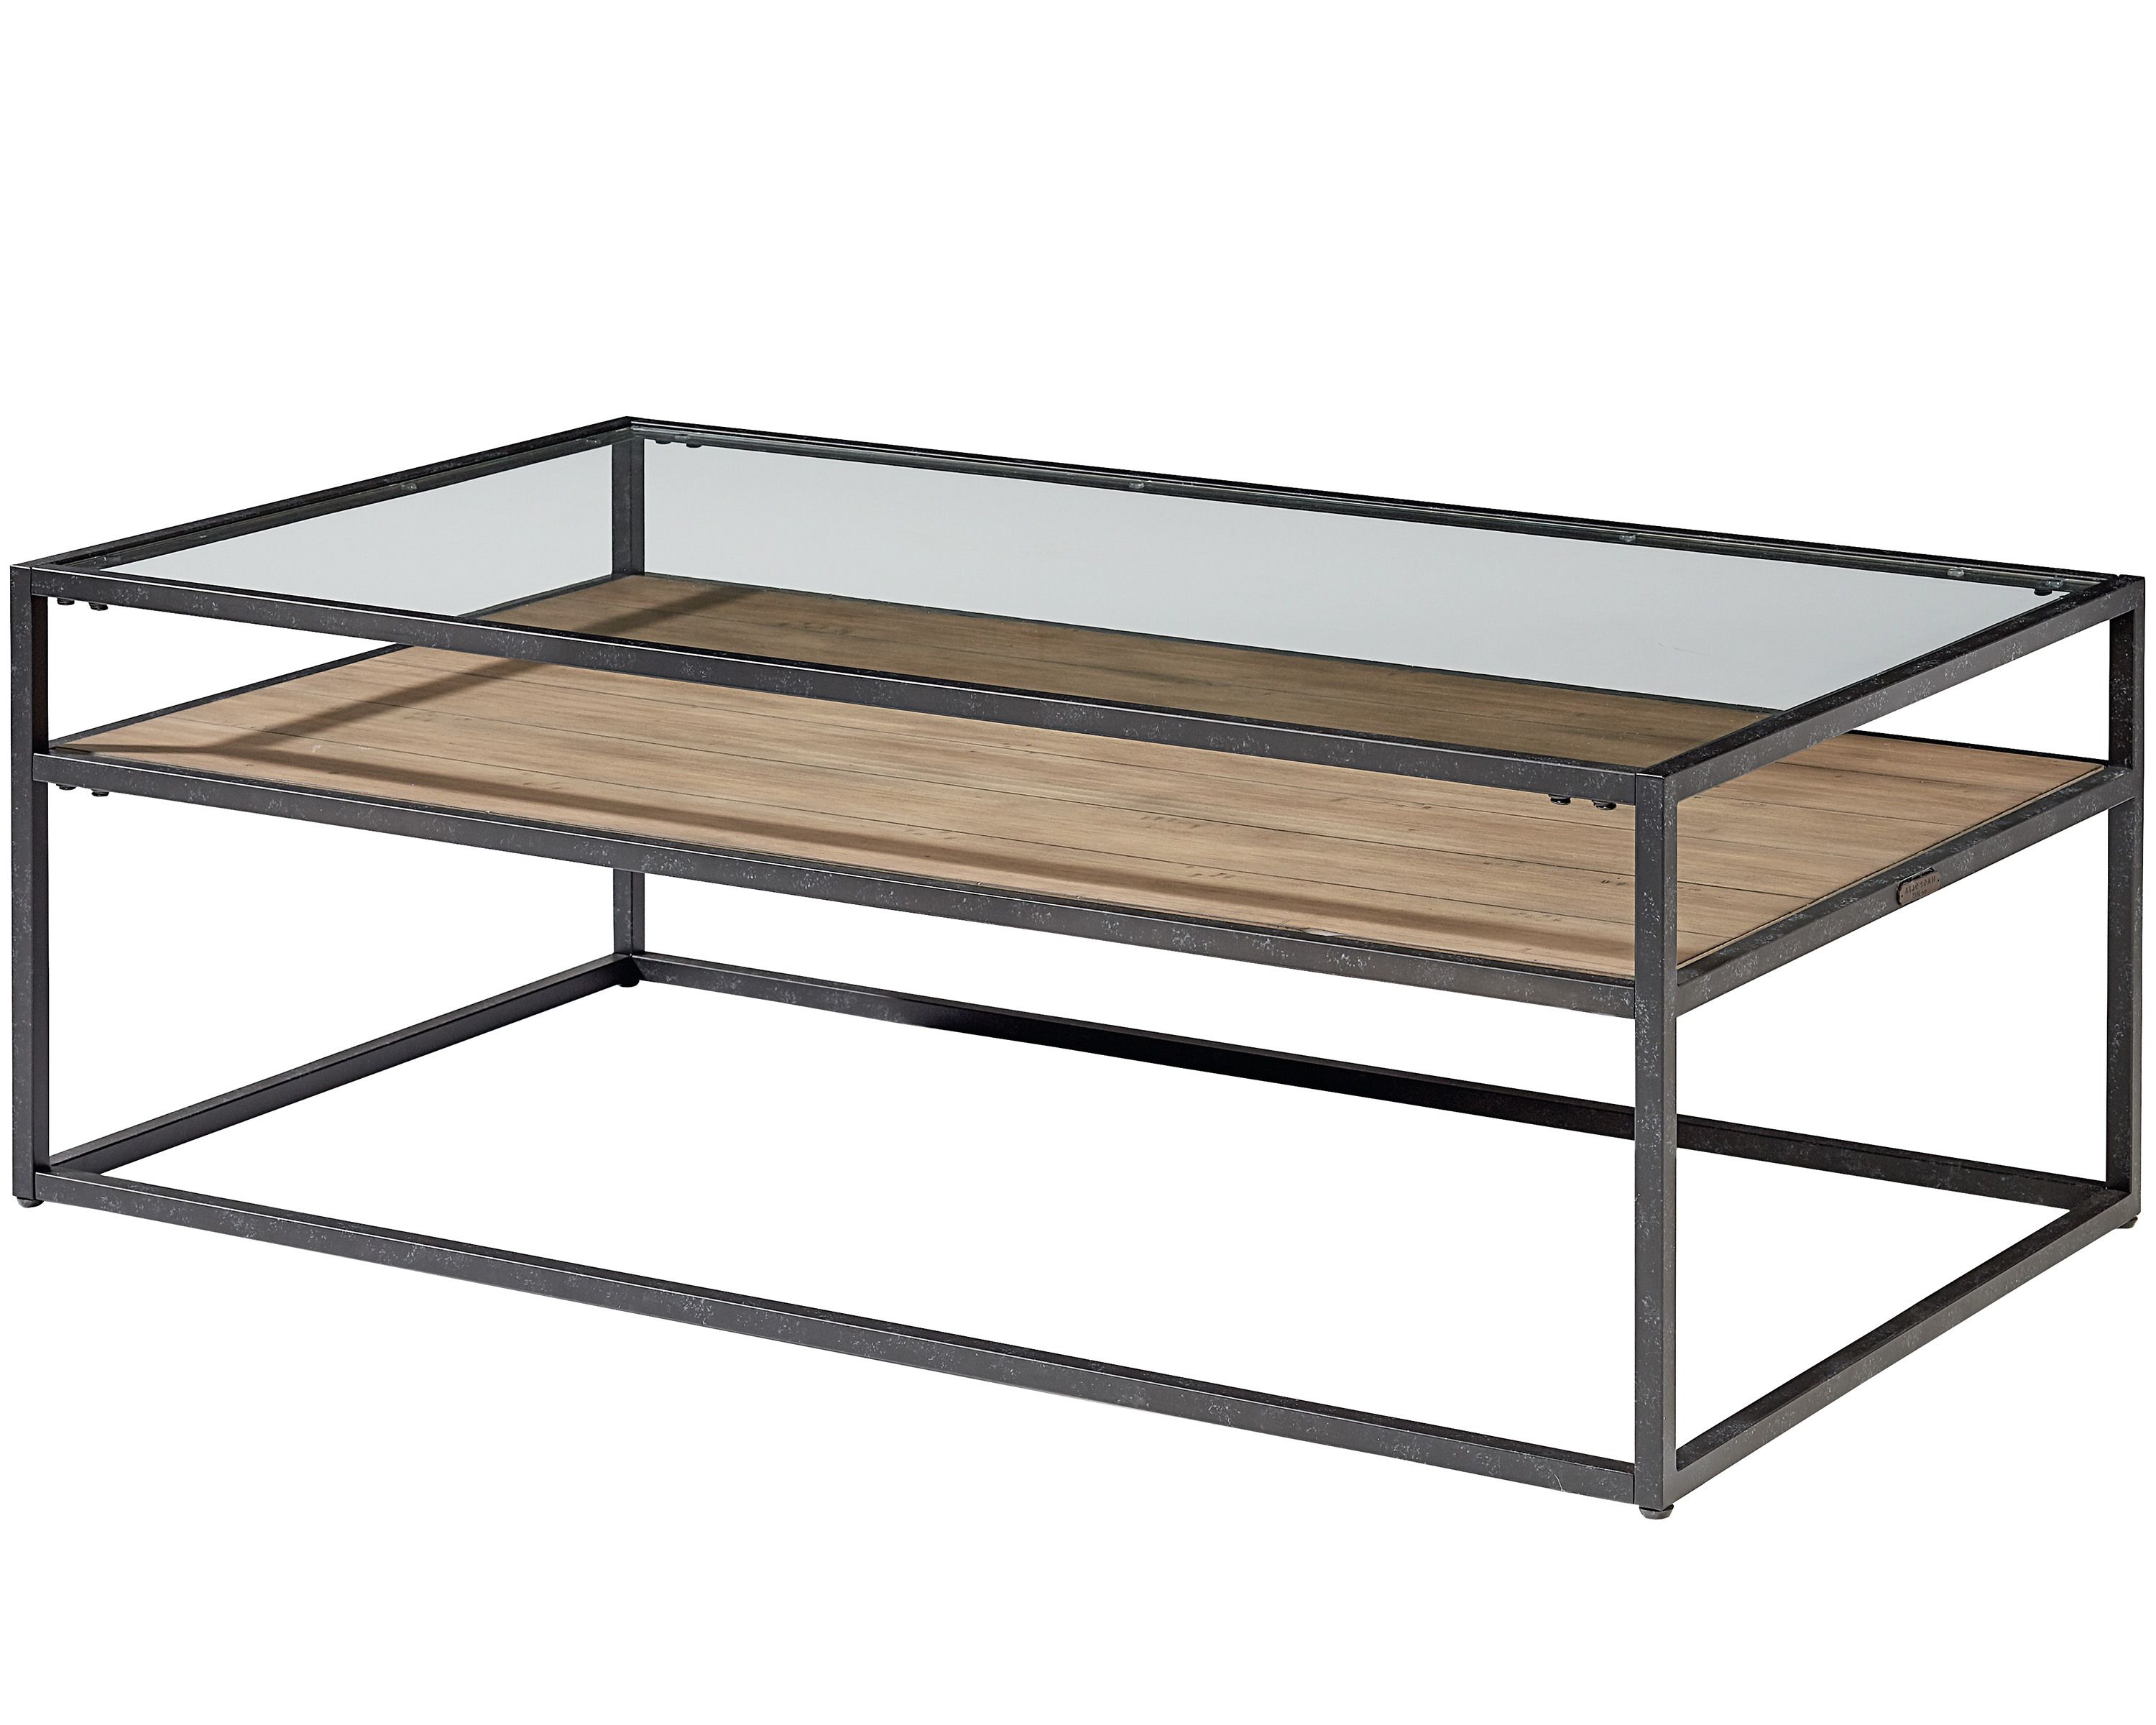 Showcase Coffee Table – Magnolia Home With Widely Used Magnolia Home Showcase Cocktail Tables (View 1 of 20)